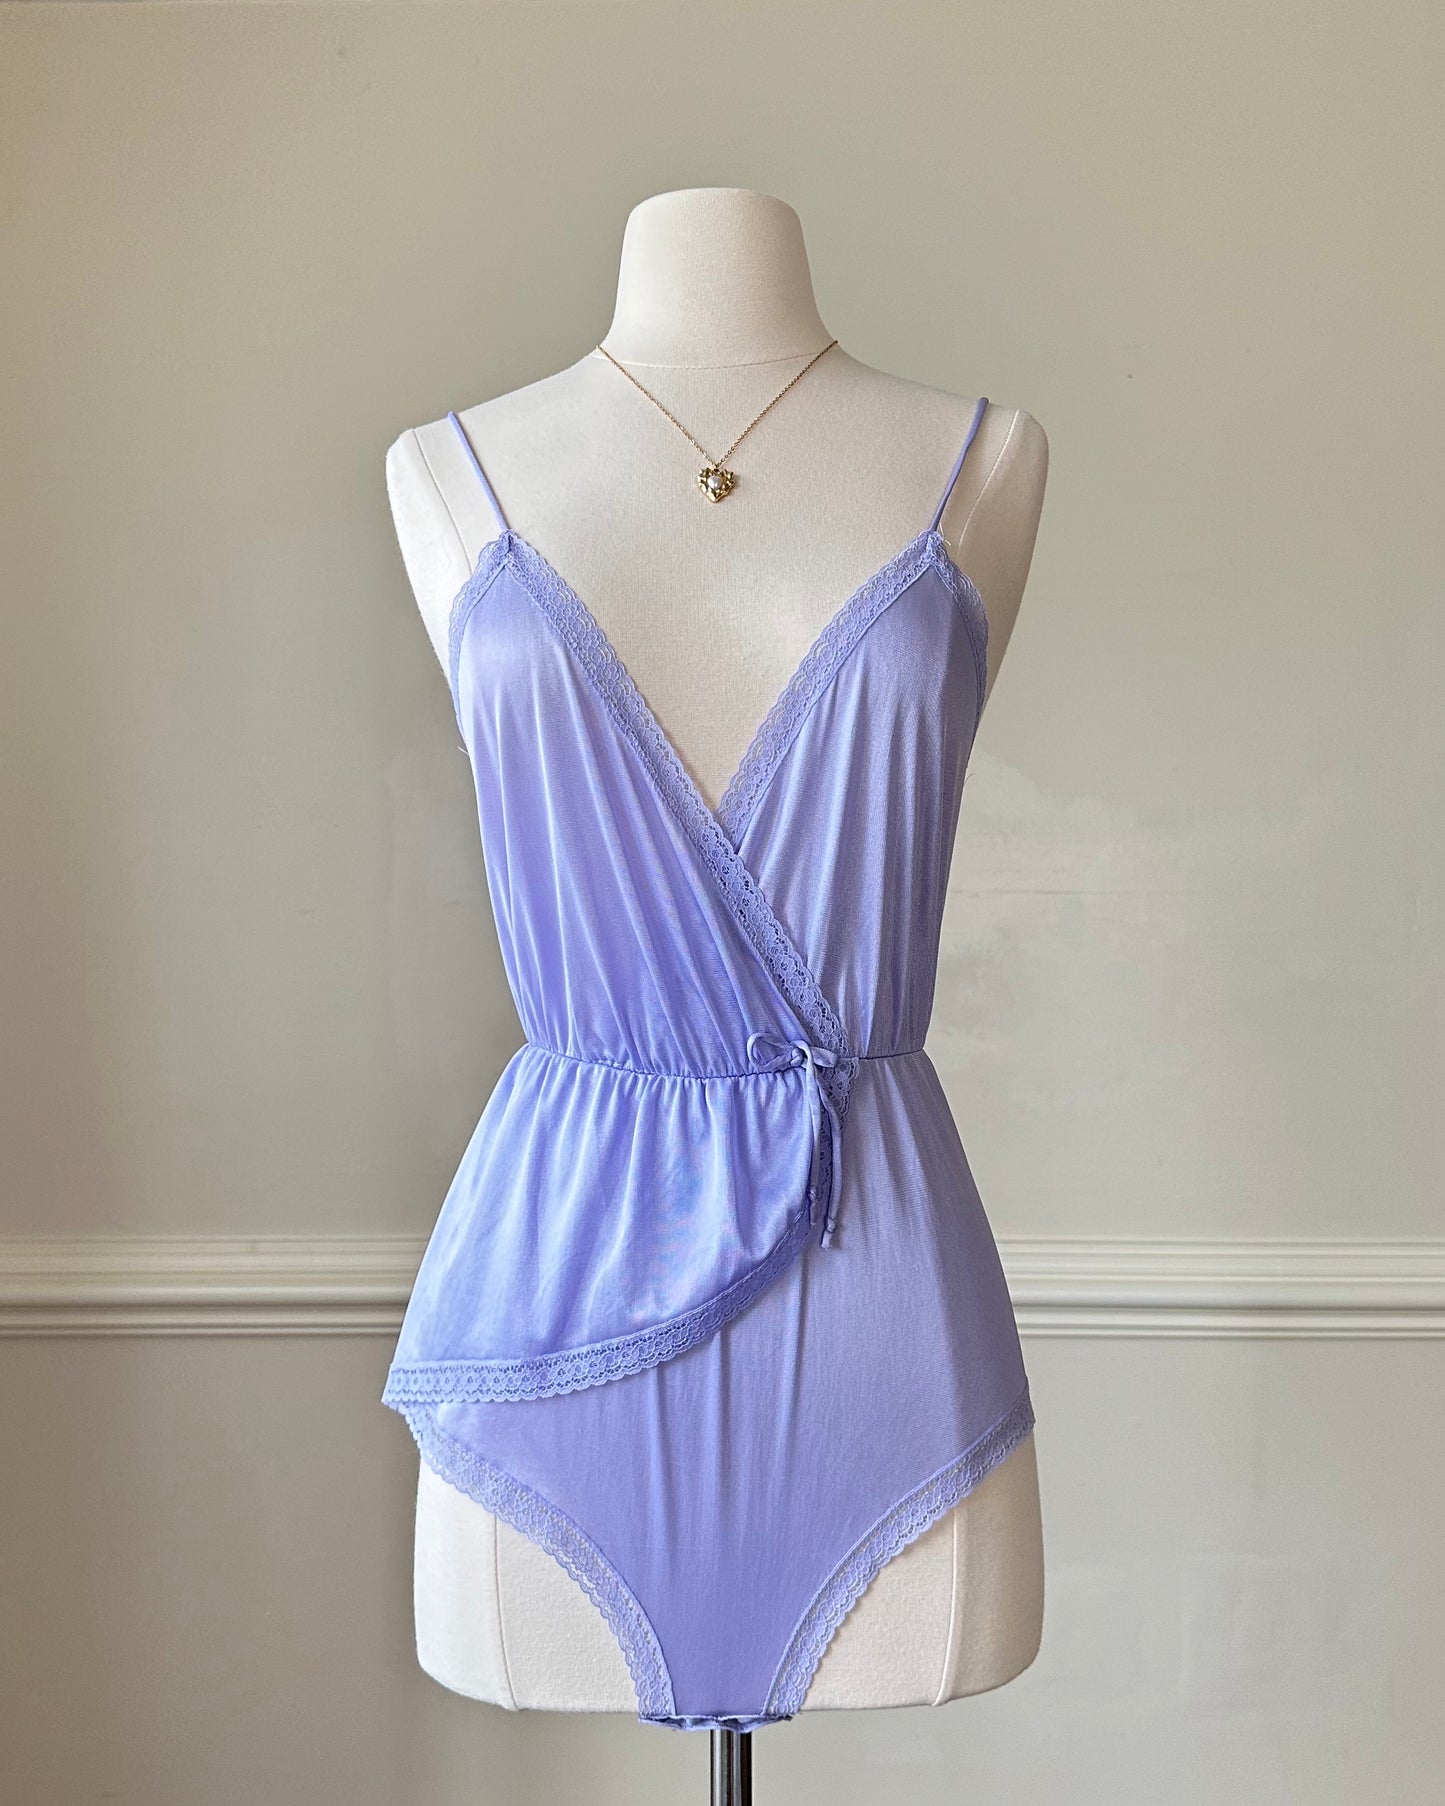 Sultry Periwinkle Bodysuit featuring Layering Details with Lace Trimmings